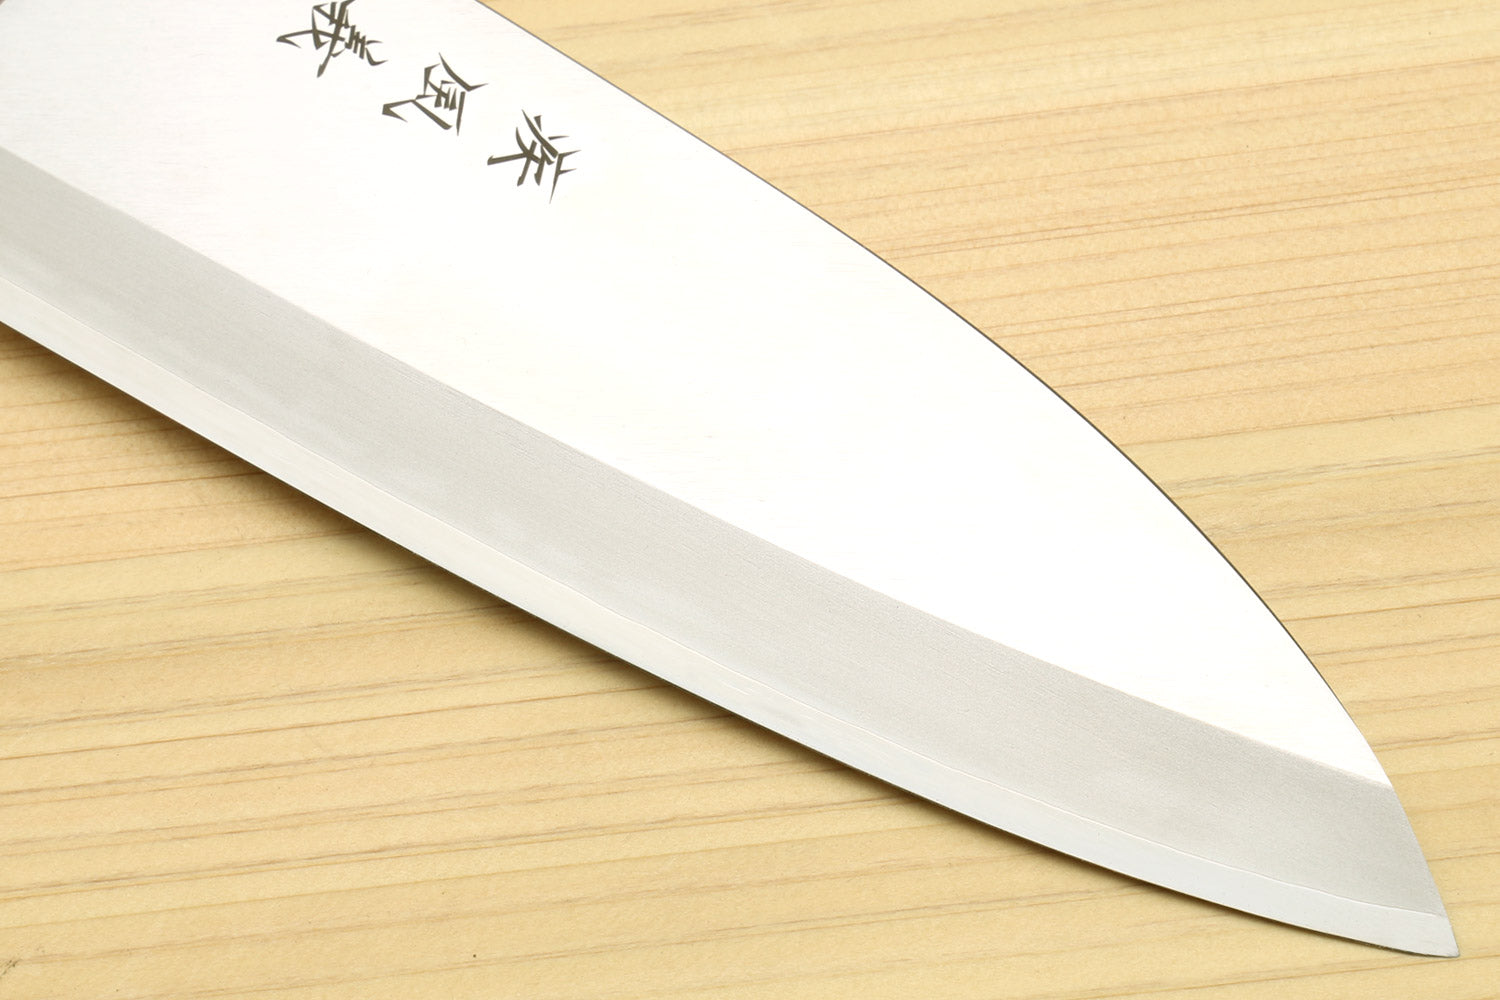  Aokura Kitchen knife Deba Knife 6 inch, Single Bevel Japanese  440C Stainless Steel Fish/Fillet Knife with full tang structure Japanese  Knife for Home Kitchen and Restaurant,Ergonomic Handle: Home & Kitchen